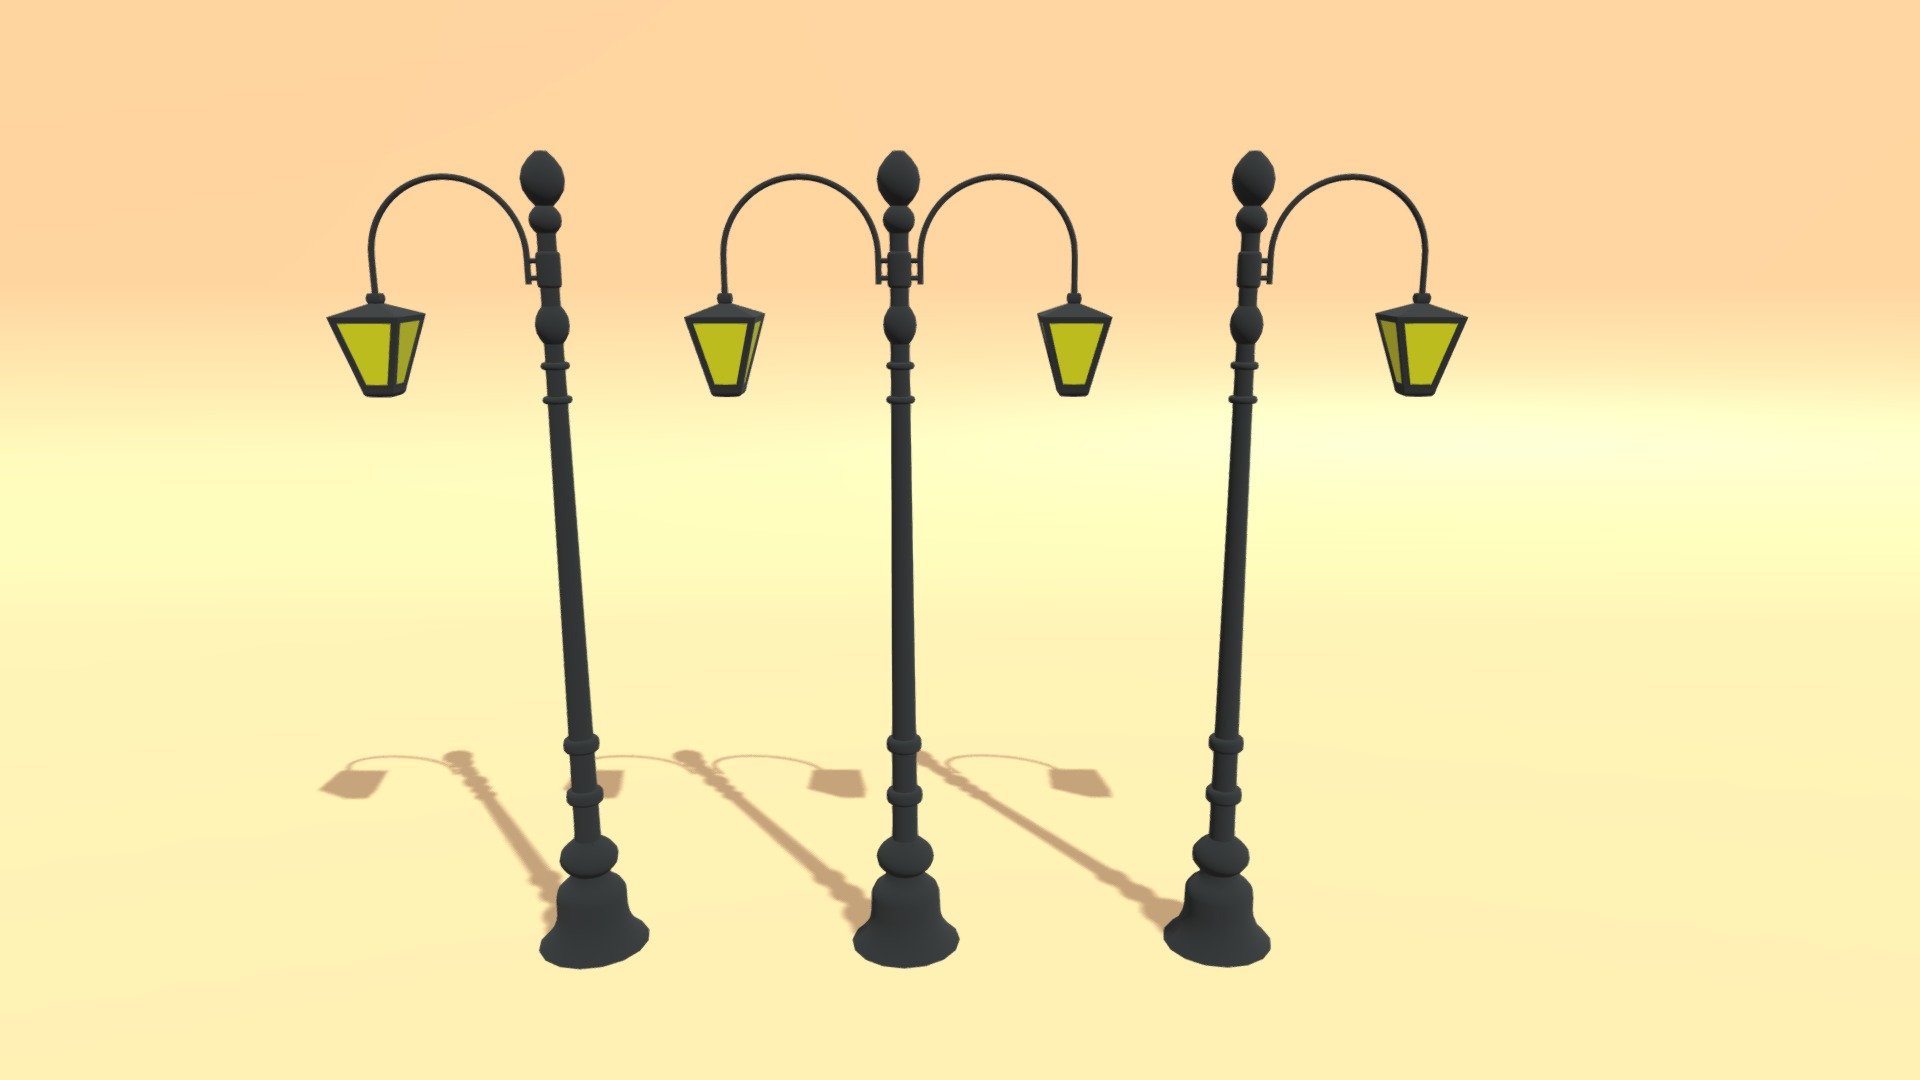 -Cartoon Street Light.

-This product contains 11 objects.

-Total vert: 3,256, poly: 3,138.

-Materials have the correct names.

-This product was created in Blender 2.8.

-Formats: blend, fbx, obj, c4d, dae, abc, stl, u4d glb, unity.

-We hope you enjoy this model.

-Thank you 3d model